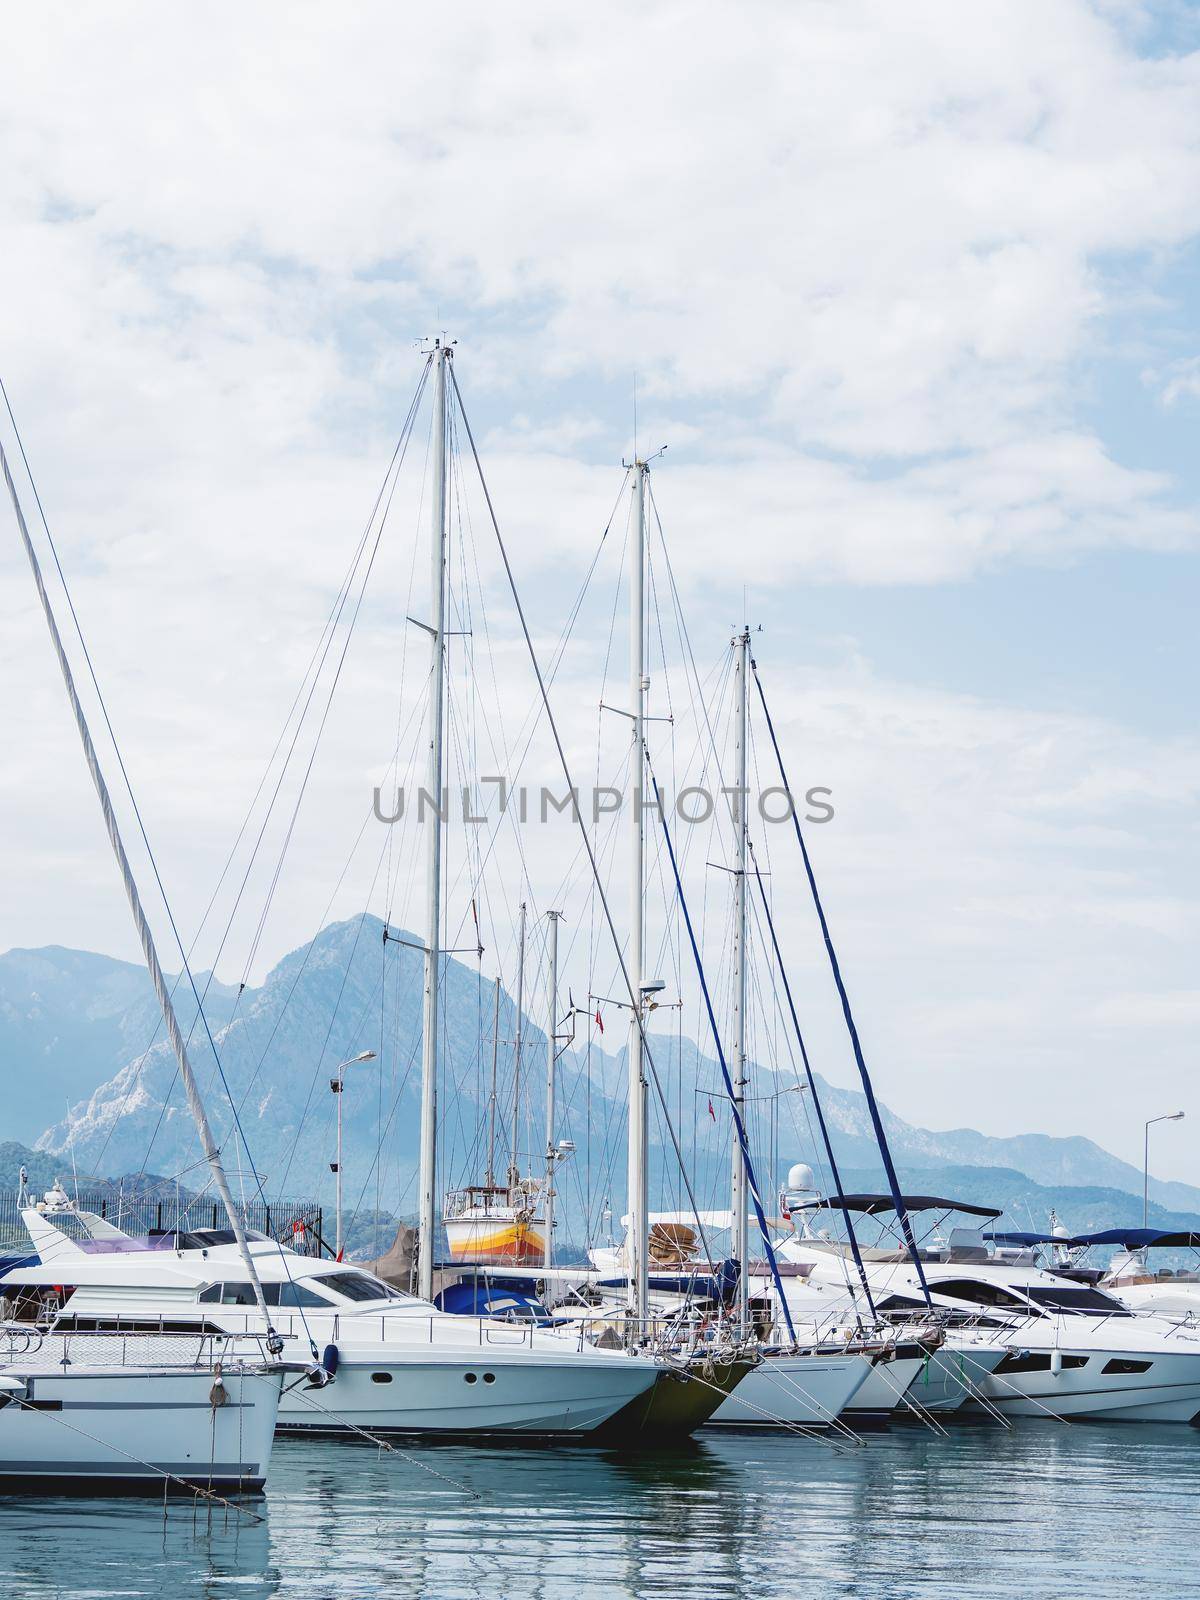 Yachts are moored at the Grand Marina, Kemer, Turkey. Beautiful ships for tourist trips on the Mediterranean sea.